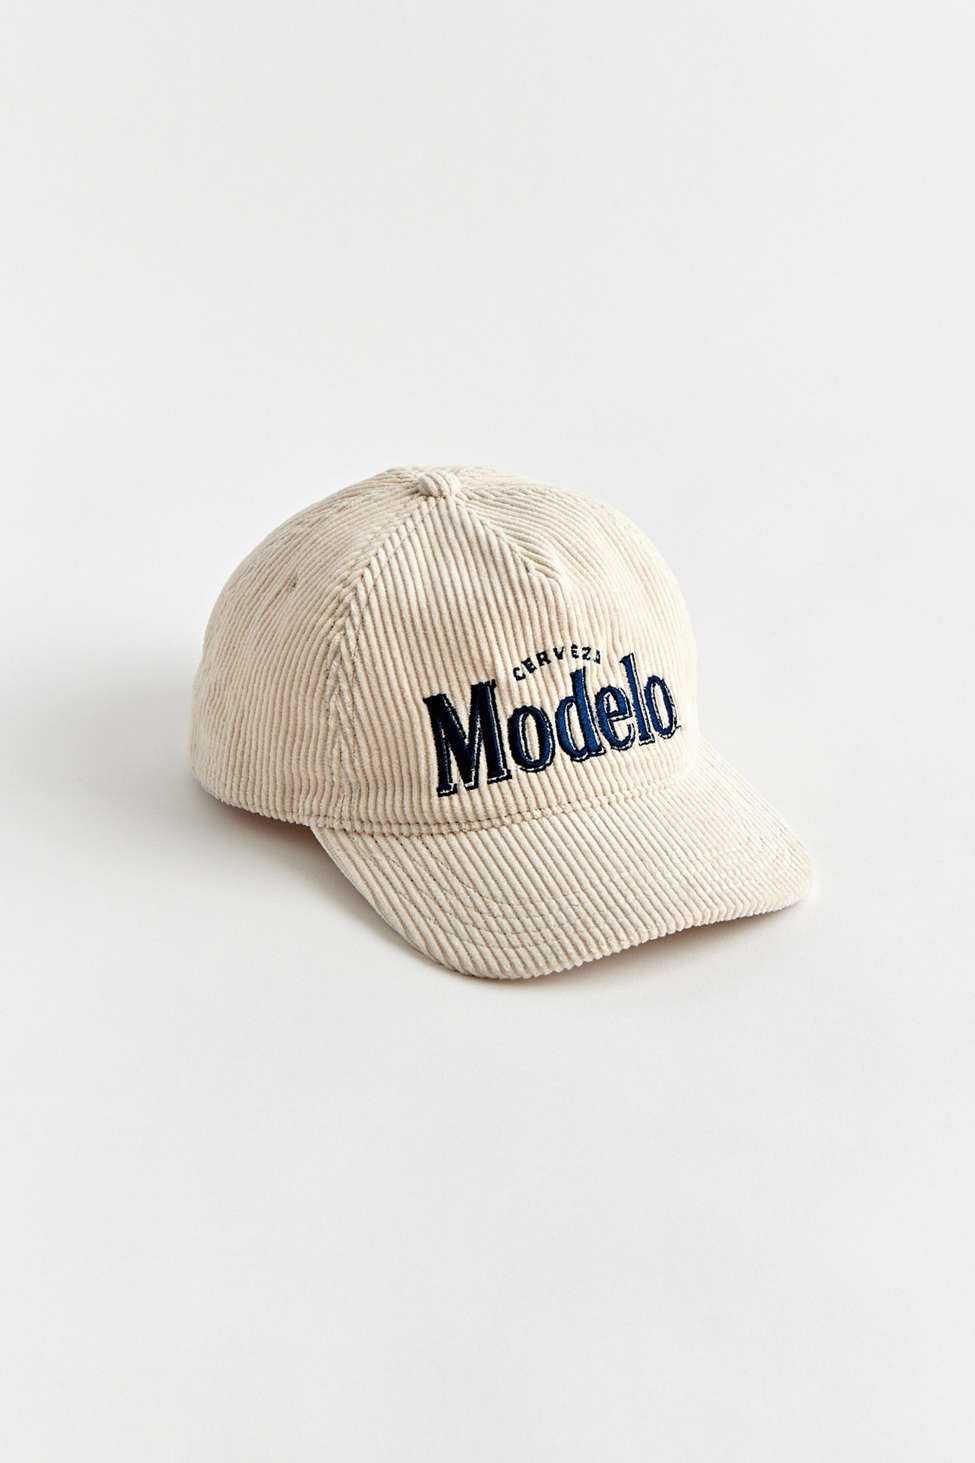 Urban Outfitters Modelo 5-panel Cord Snapback Hat In Cream, Men's At